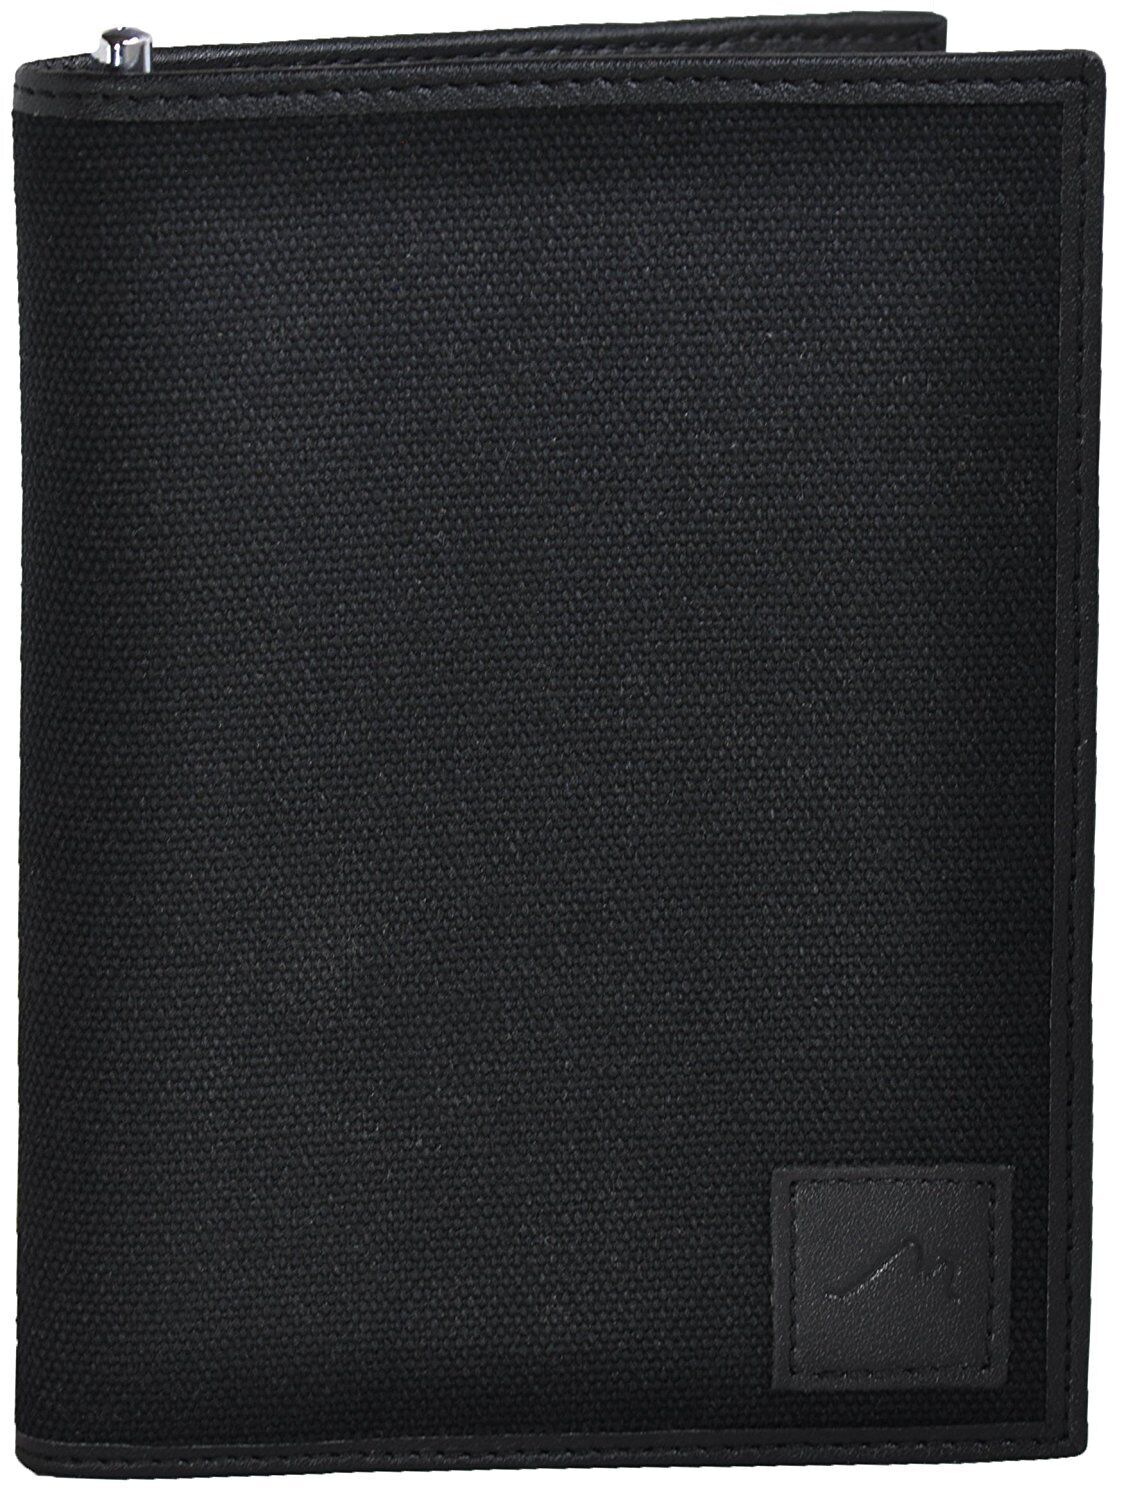 Vegan Leather Field Notebook Writing Notepad Cover by Metier Life